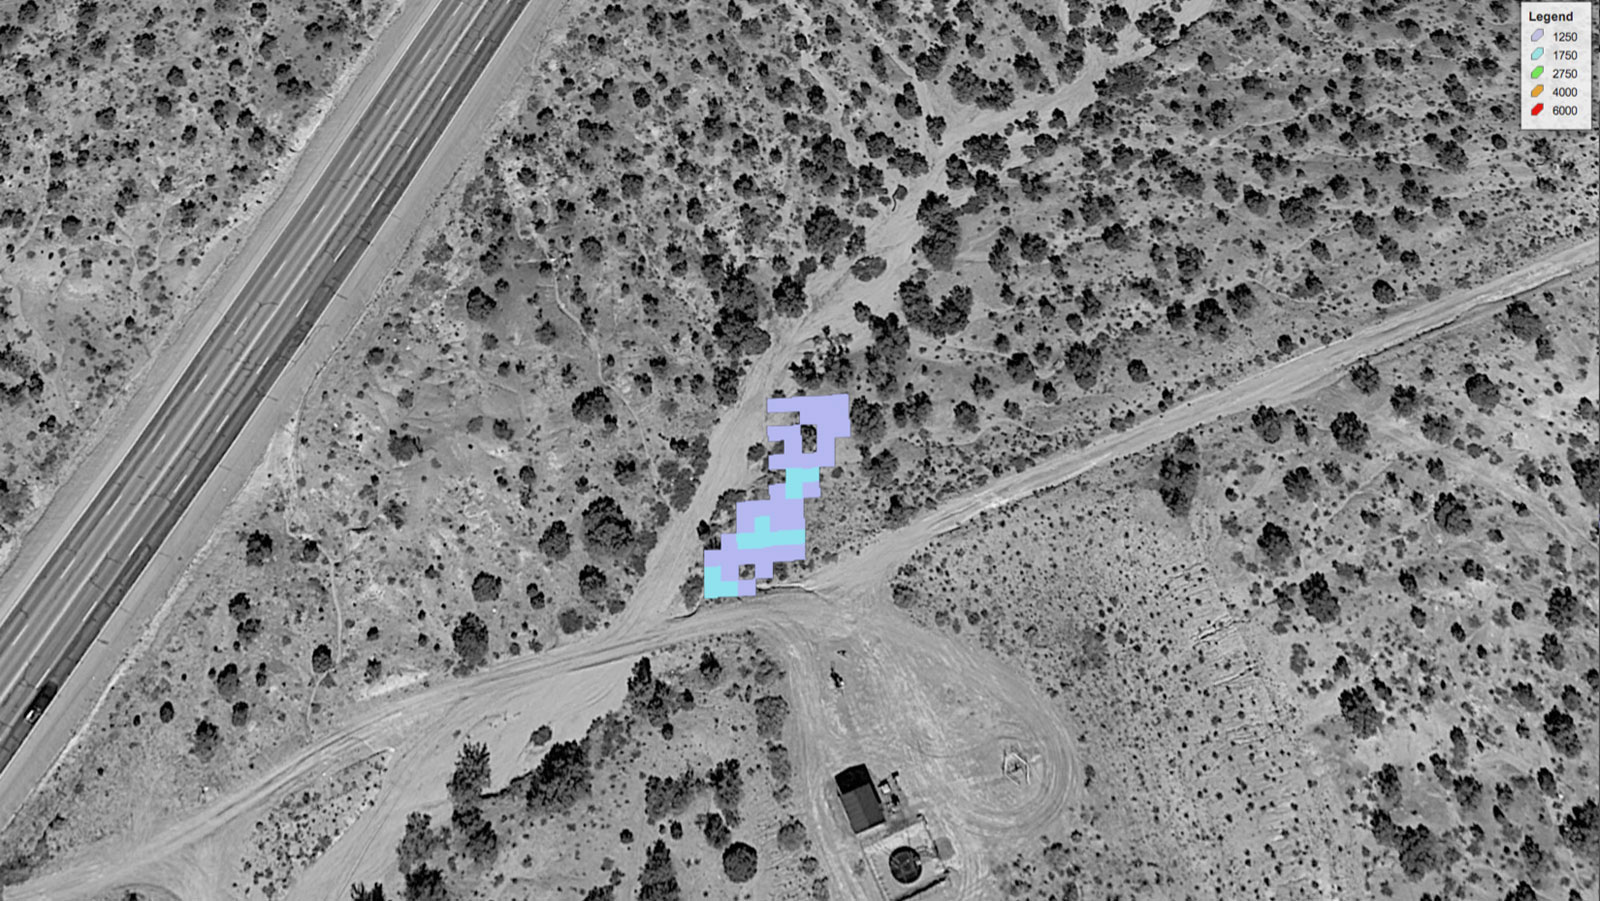 Grayscale satellite image of a dry landscape dotted with sparse trees and cut up by roads and a clearly that may be a wellpad. In the center of the image, blue and purple squares indicate the presence of a methane leak detected using specialized satellite equipment.